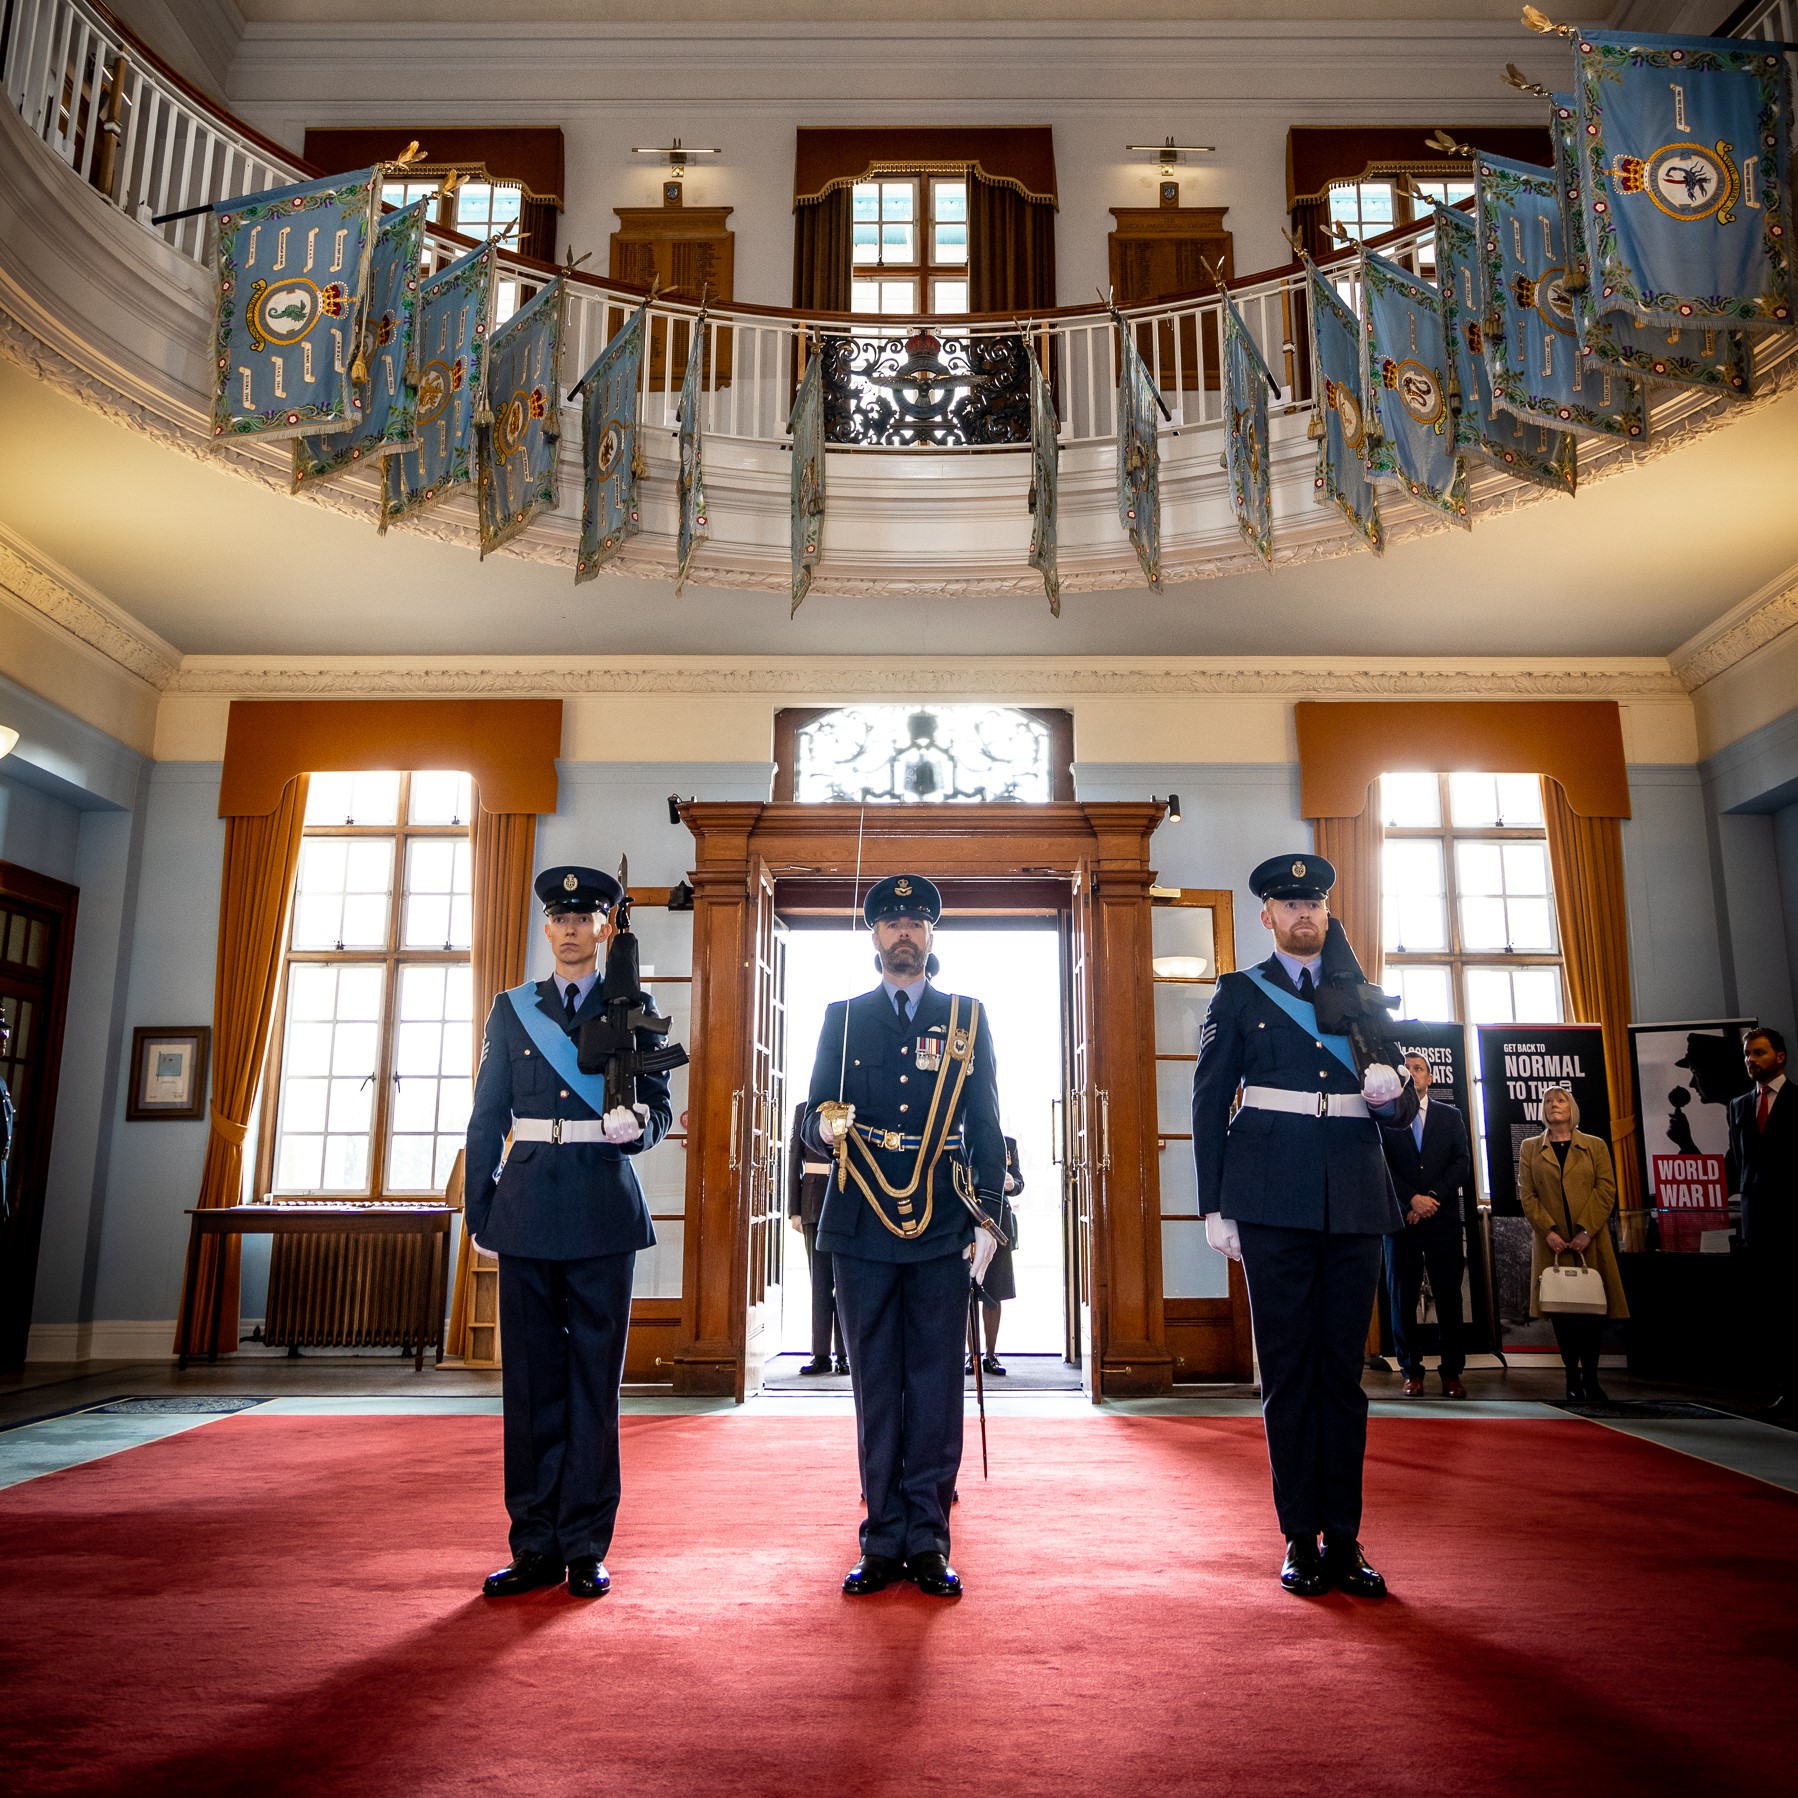 Image shows RAF aviators inside Officers' Mess during ceremony.